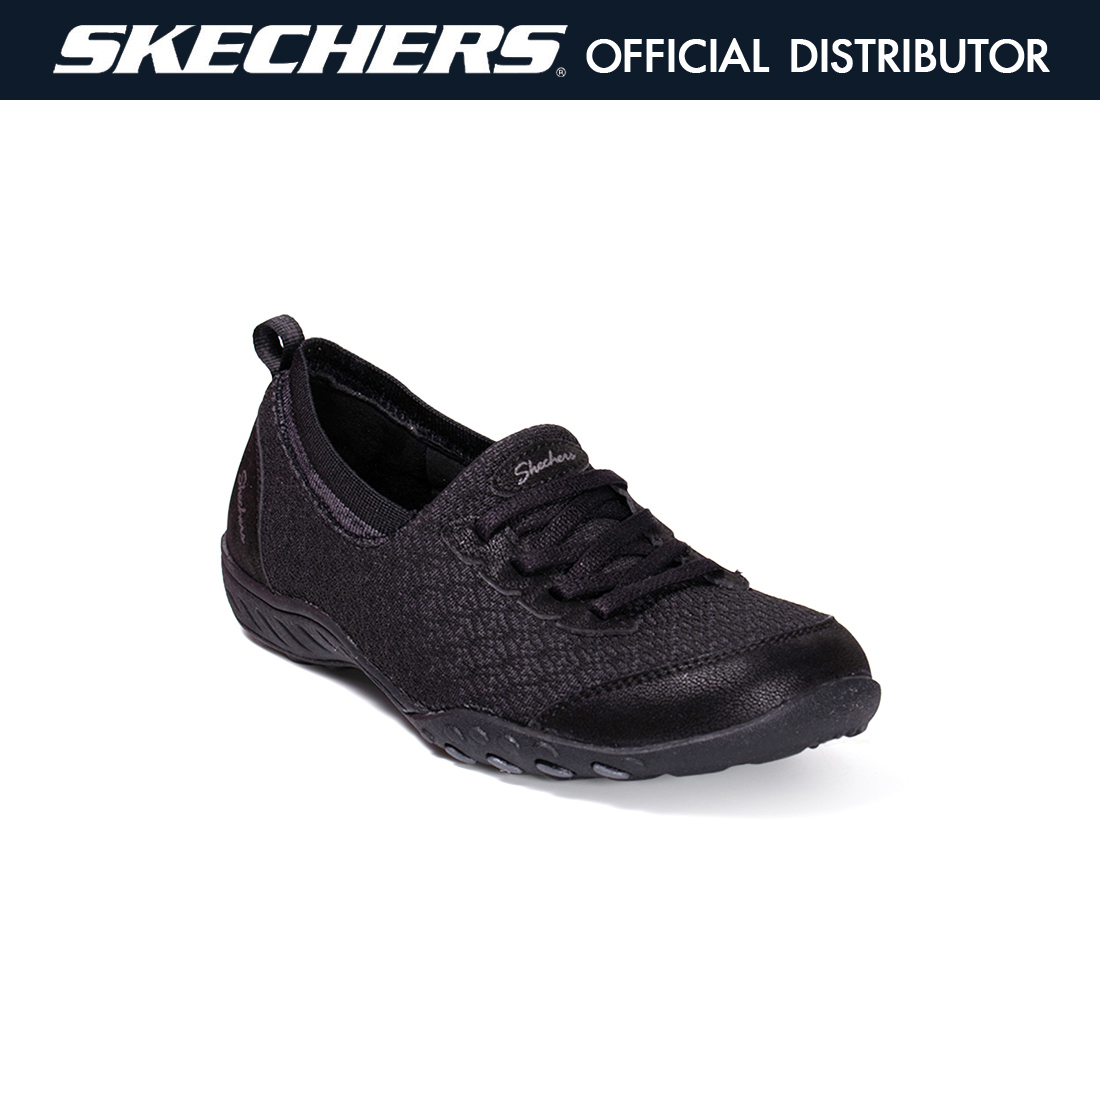 SKECHERS Relaxed Fit : Breathe Easy - I'm Dreaming รองเท้าลำลองผู้หญิง